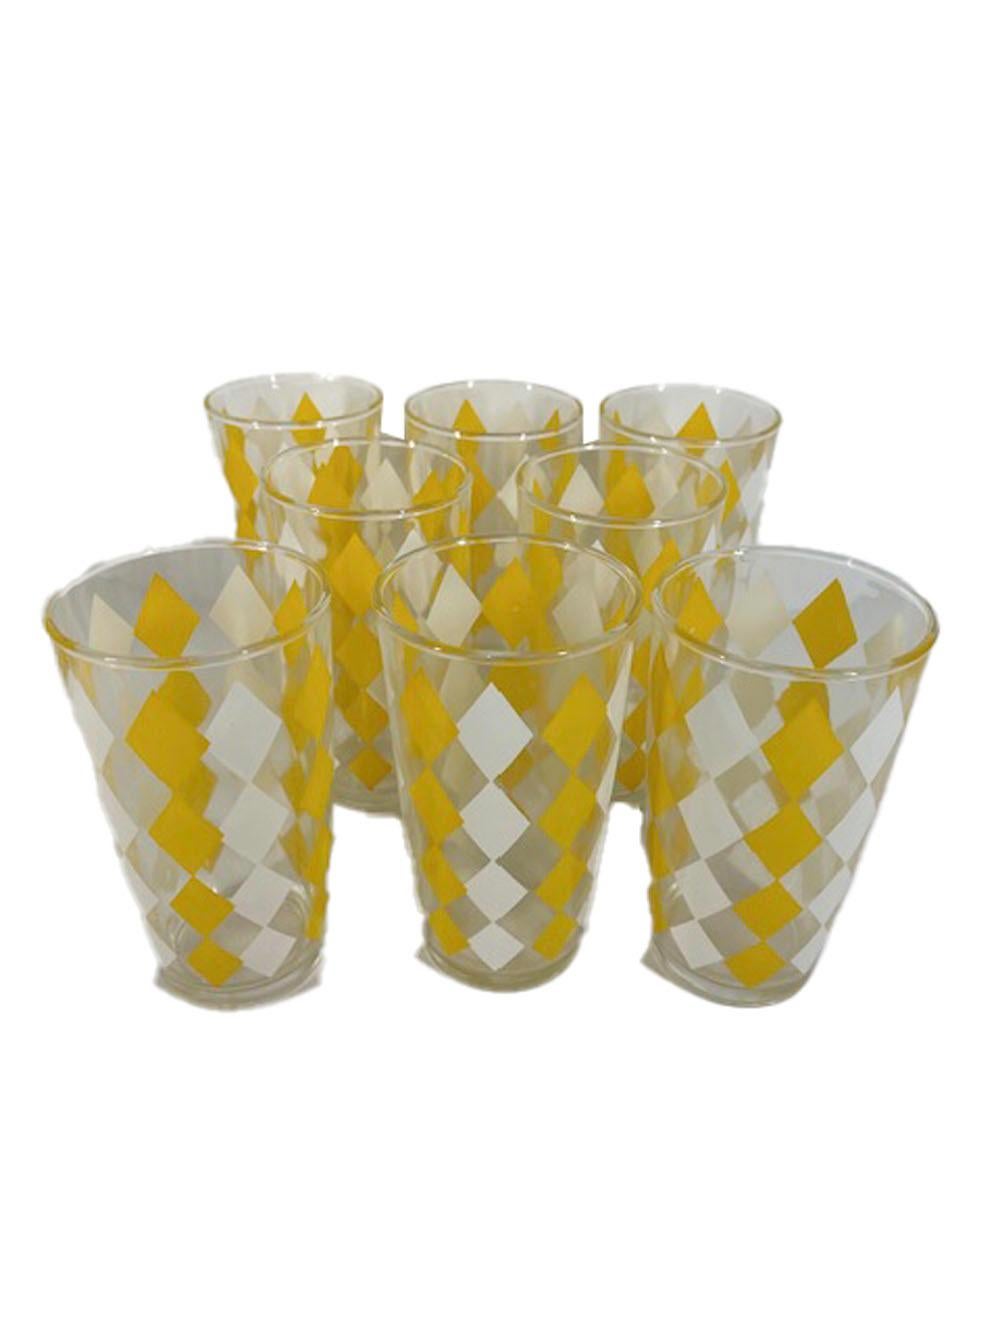 American Vintage Yellow and White Diamonds Cocktail Shaker, Ice Bowl and Glasses Set